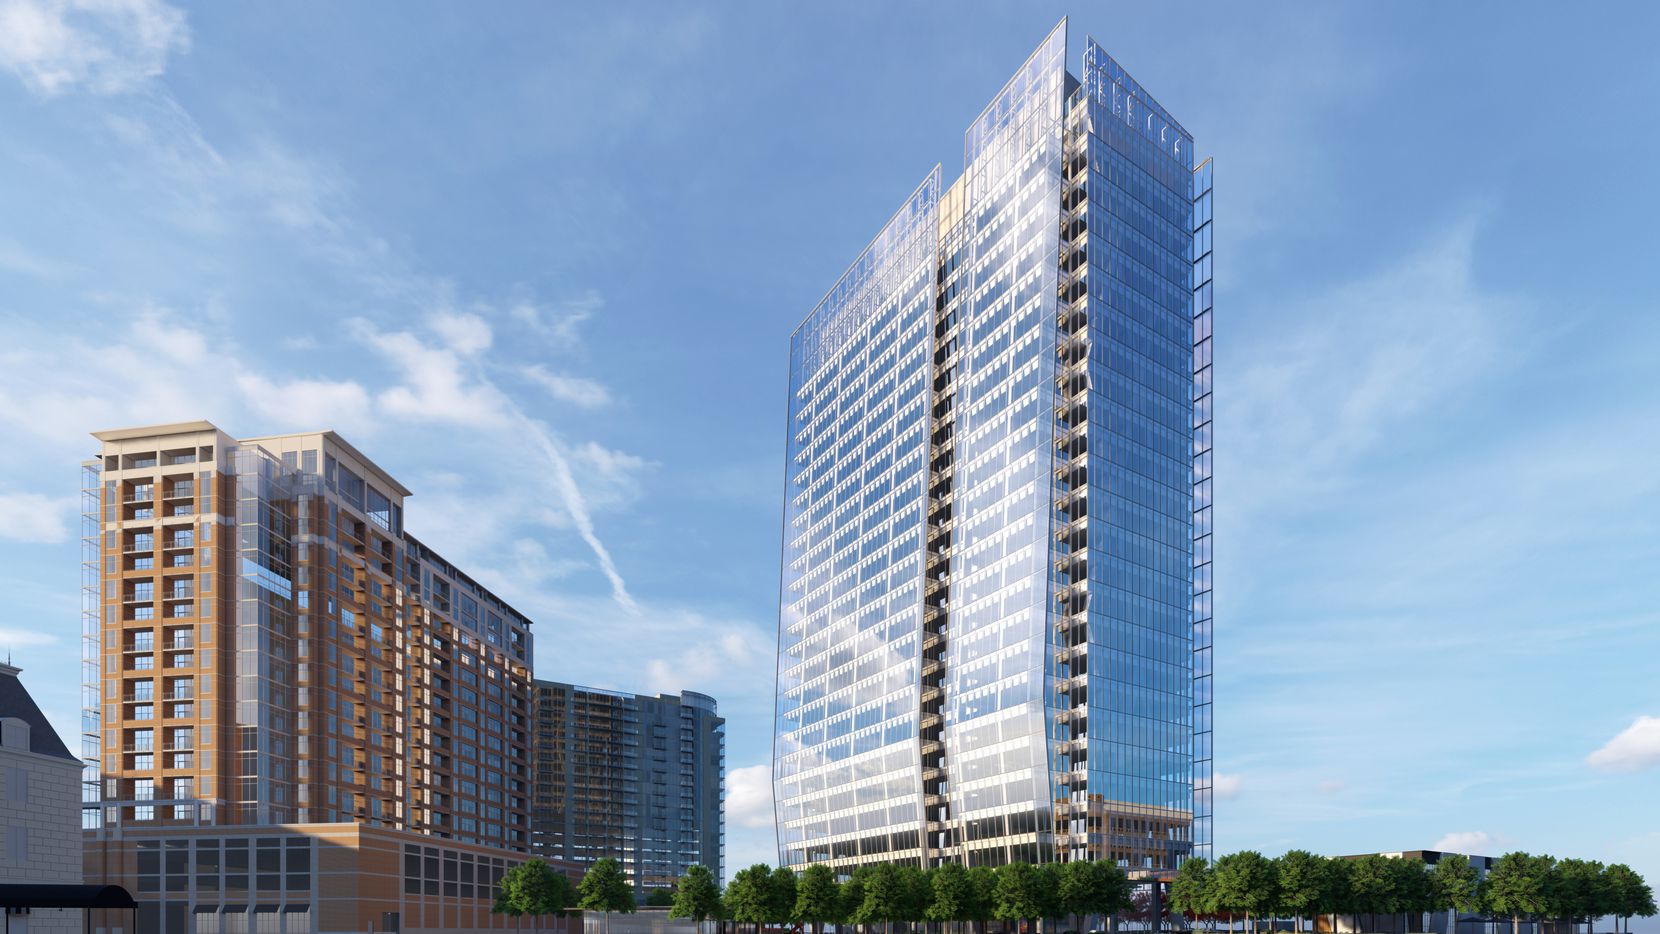 Uptown tower project gets a green light thanks to major bank lease and funding